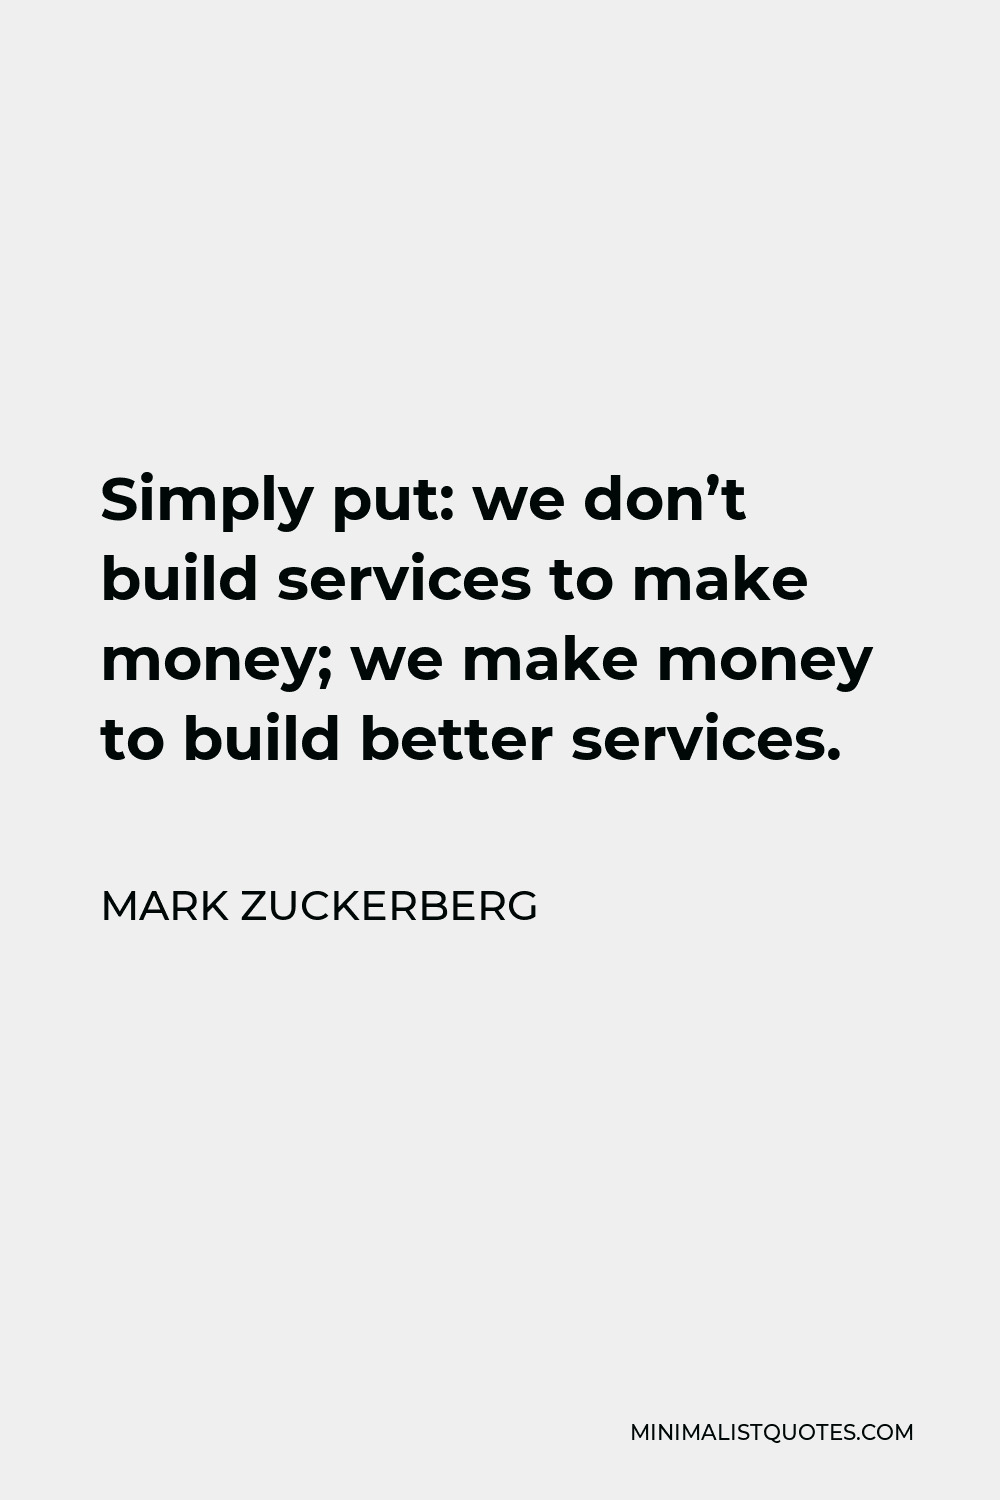 Mark Zuckerberg Quote - Simply put: we don’t build services to make money; we make money to build better services.